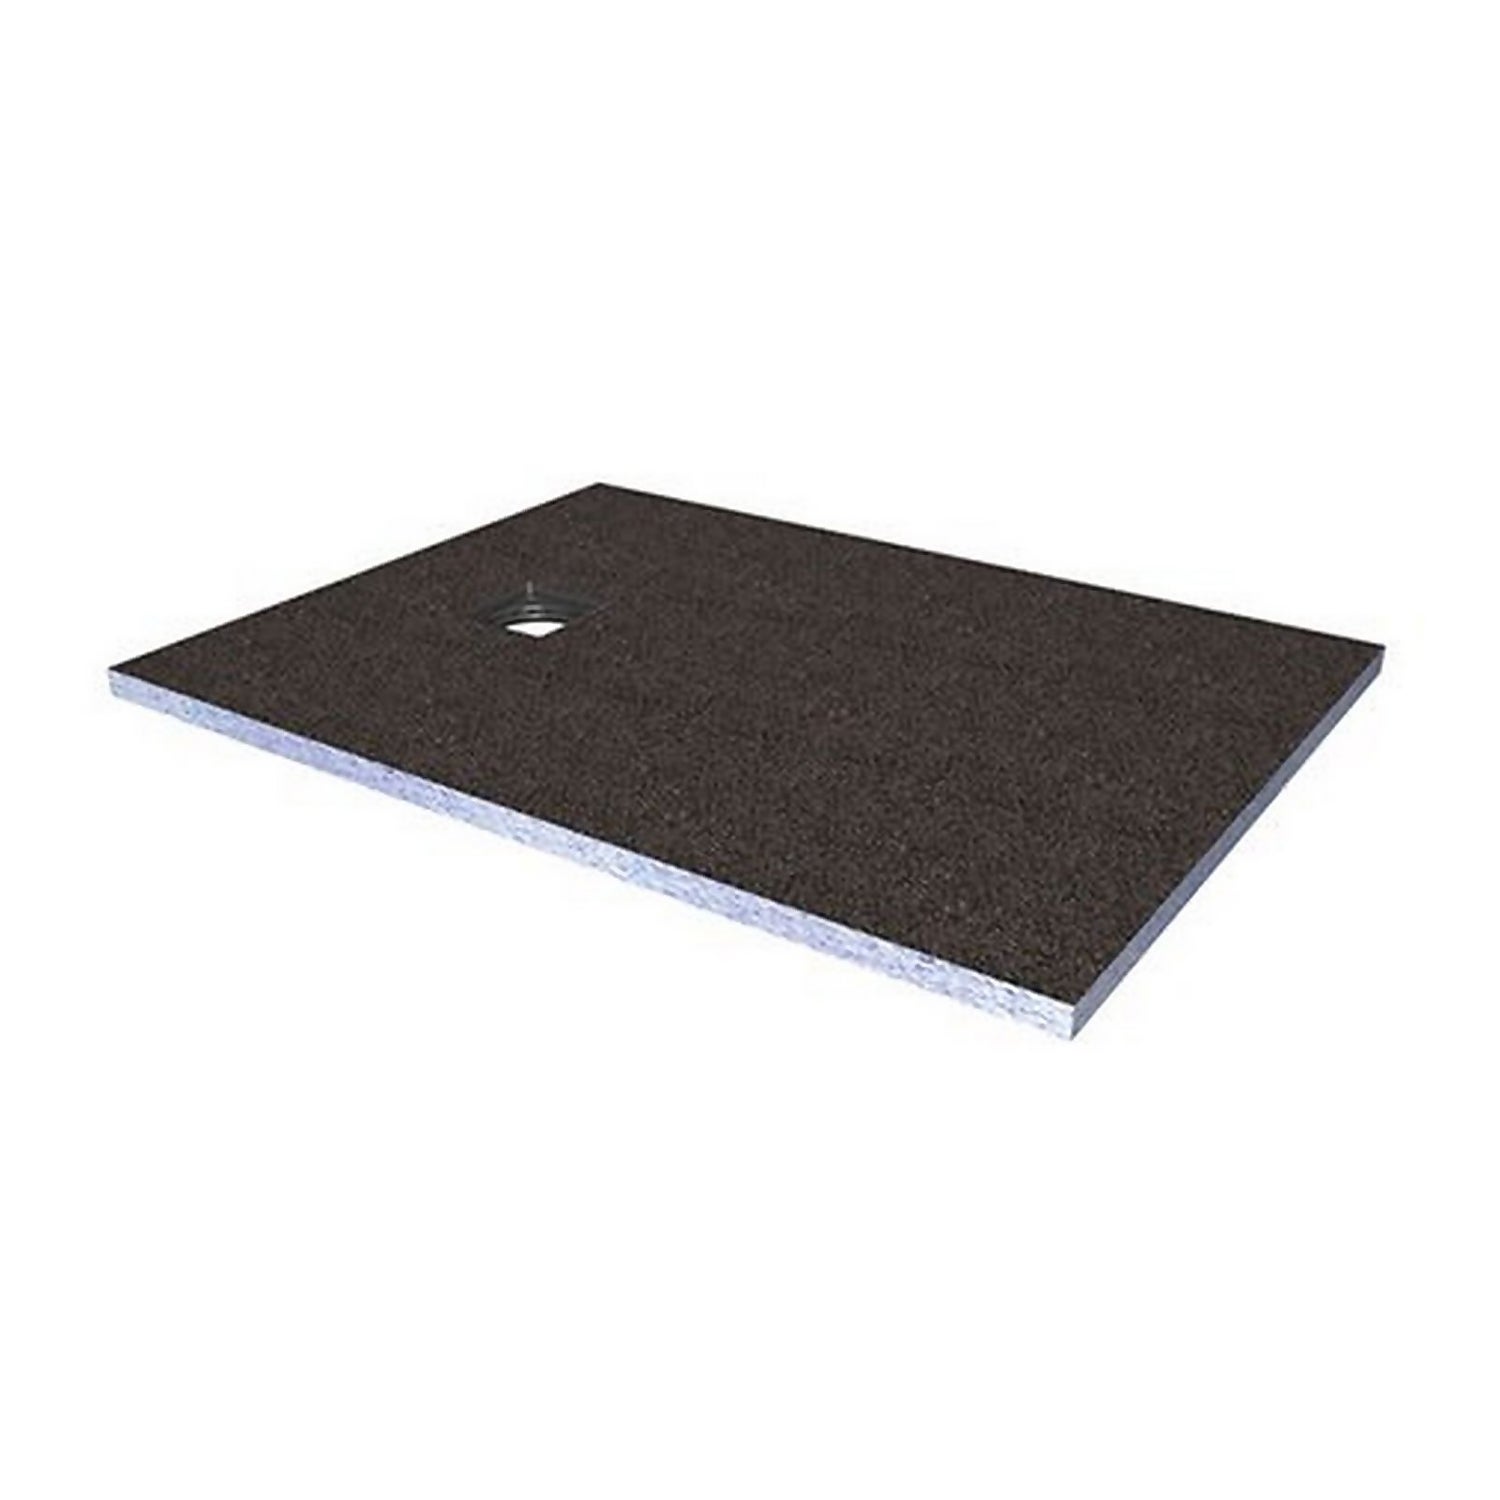 Square End Drain Wet room Tray 1500 x 800mm